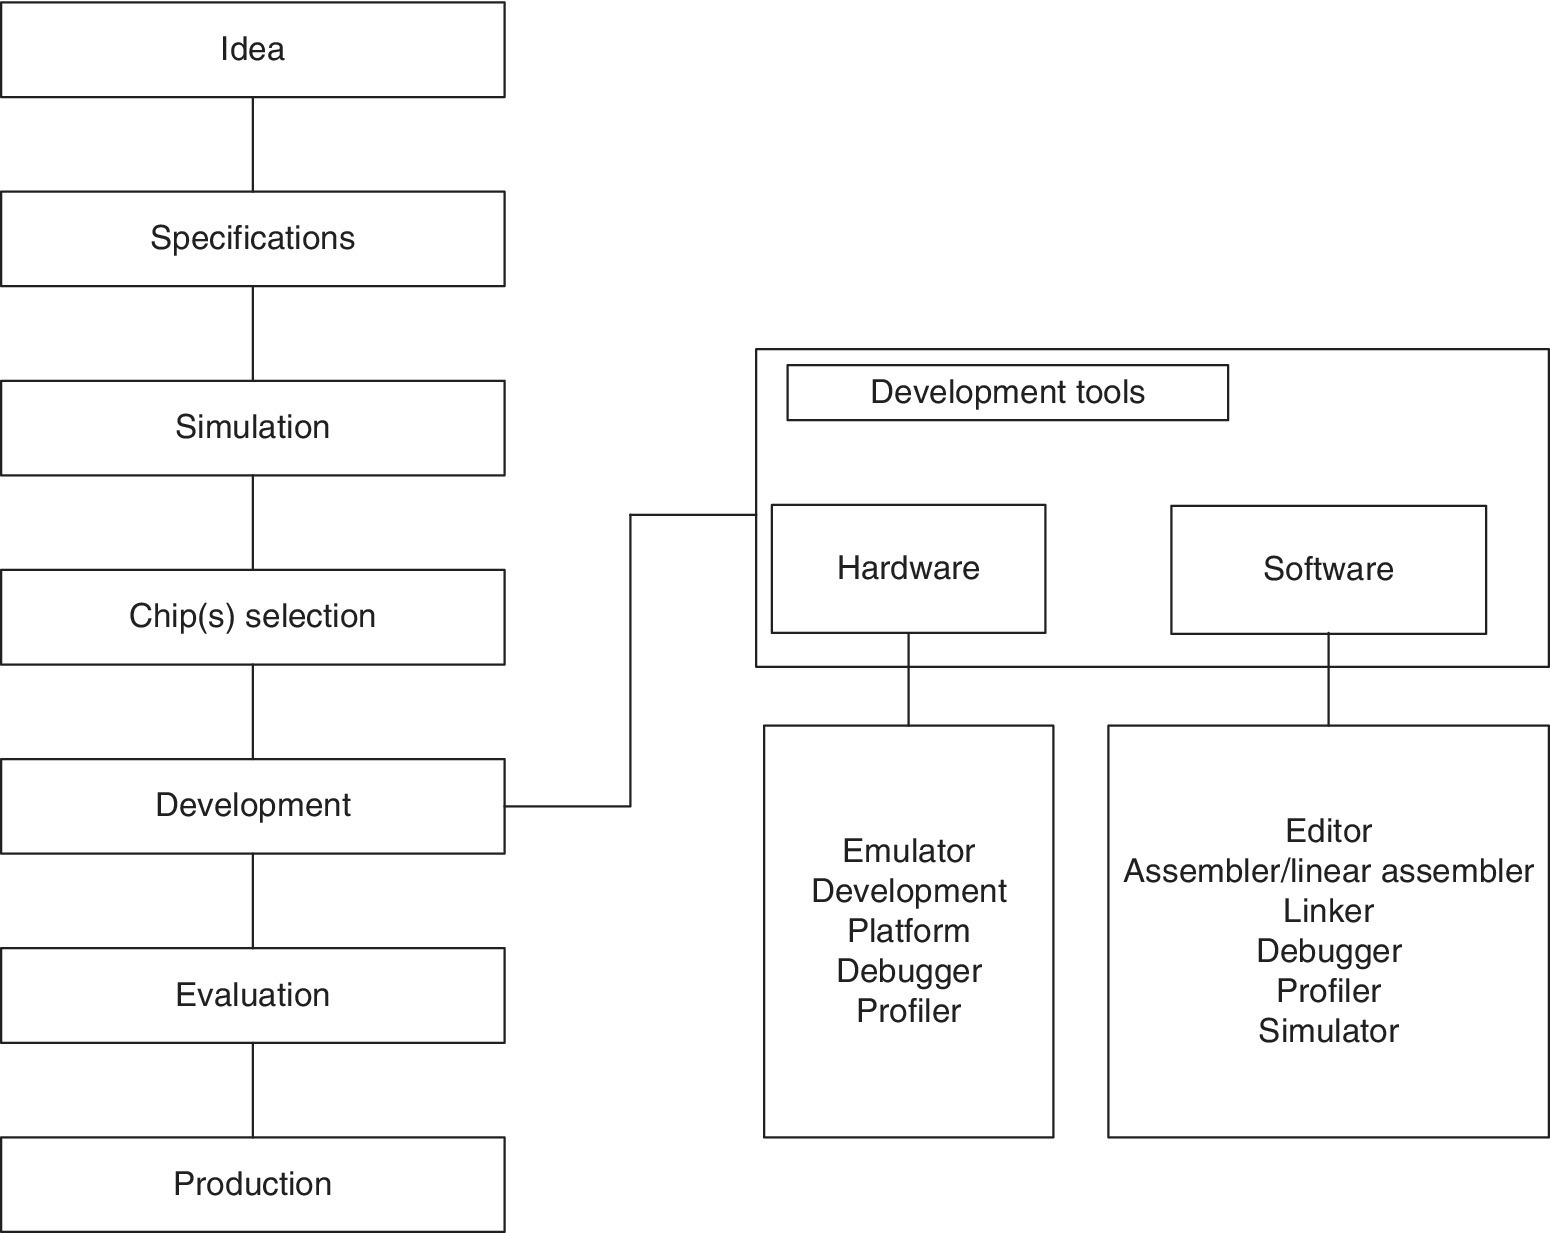 Diagram illustrating the hardware and software development tools with linked boxes labeled idea, specifications, simulation, chip(s) selection, development, evaluation, and production.